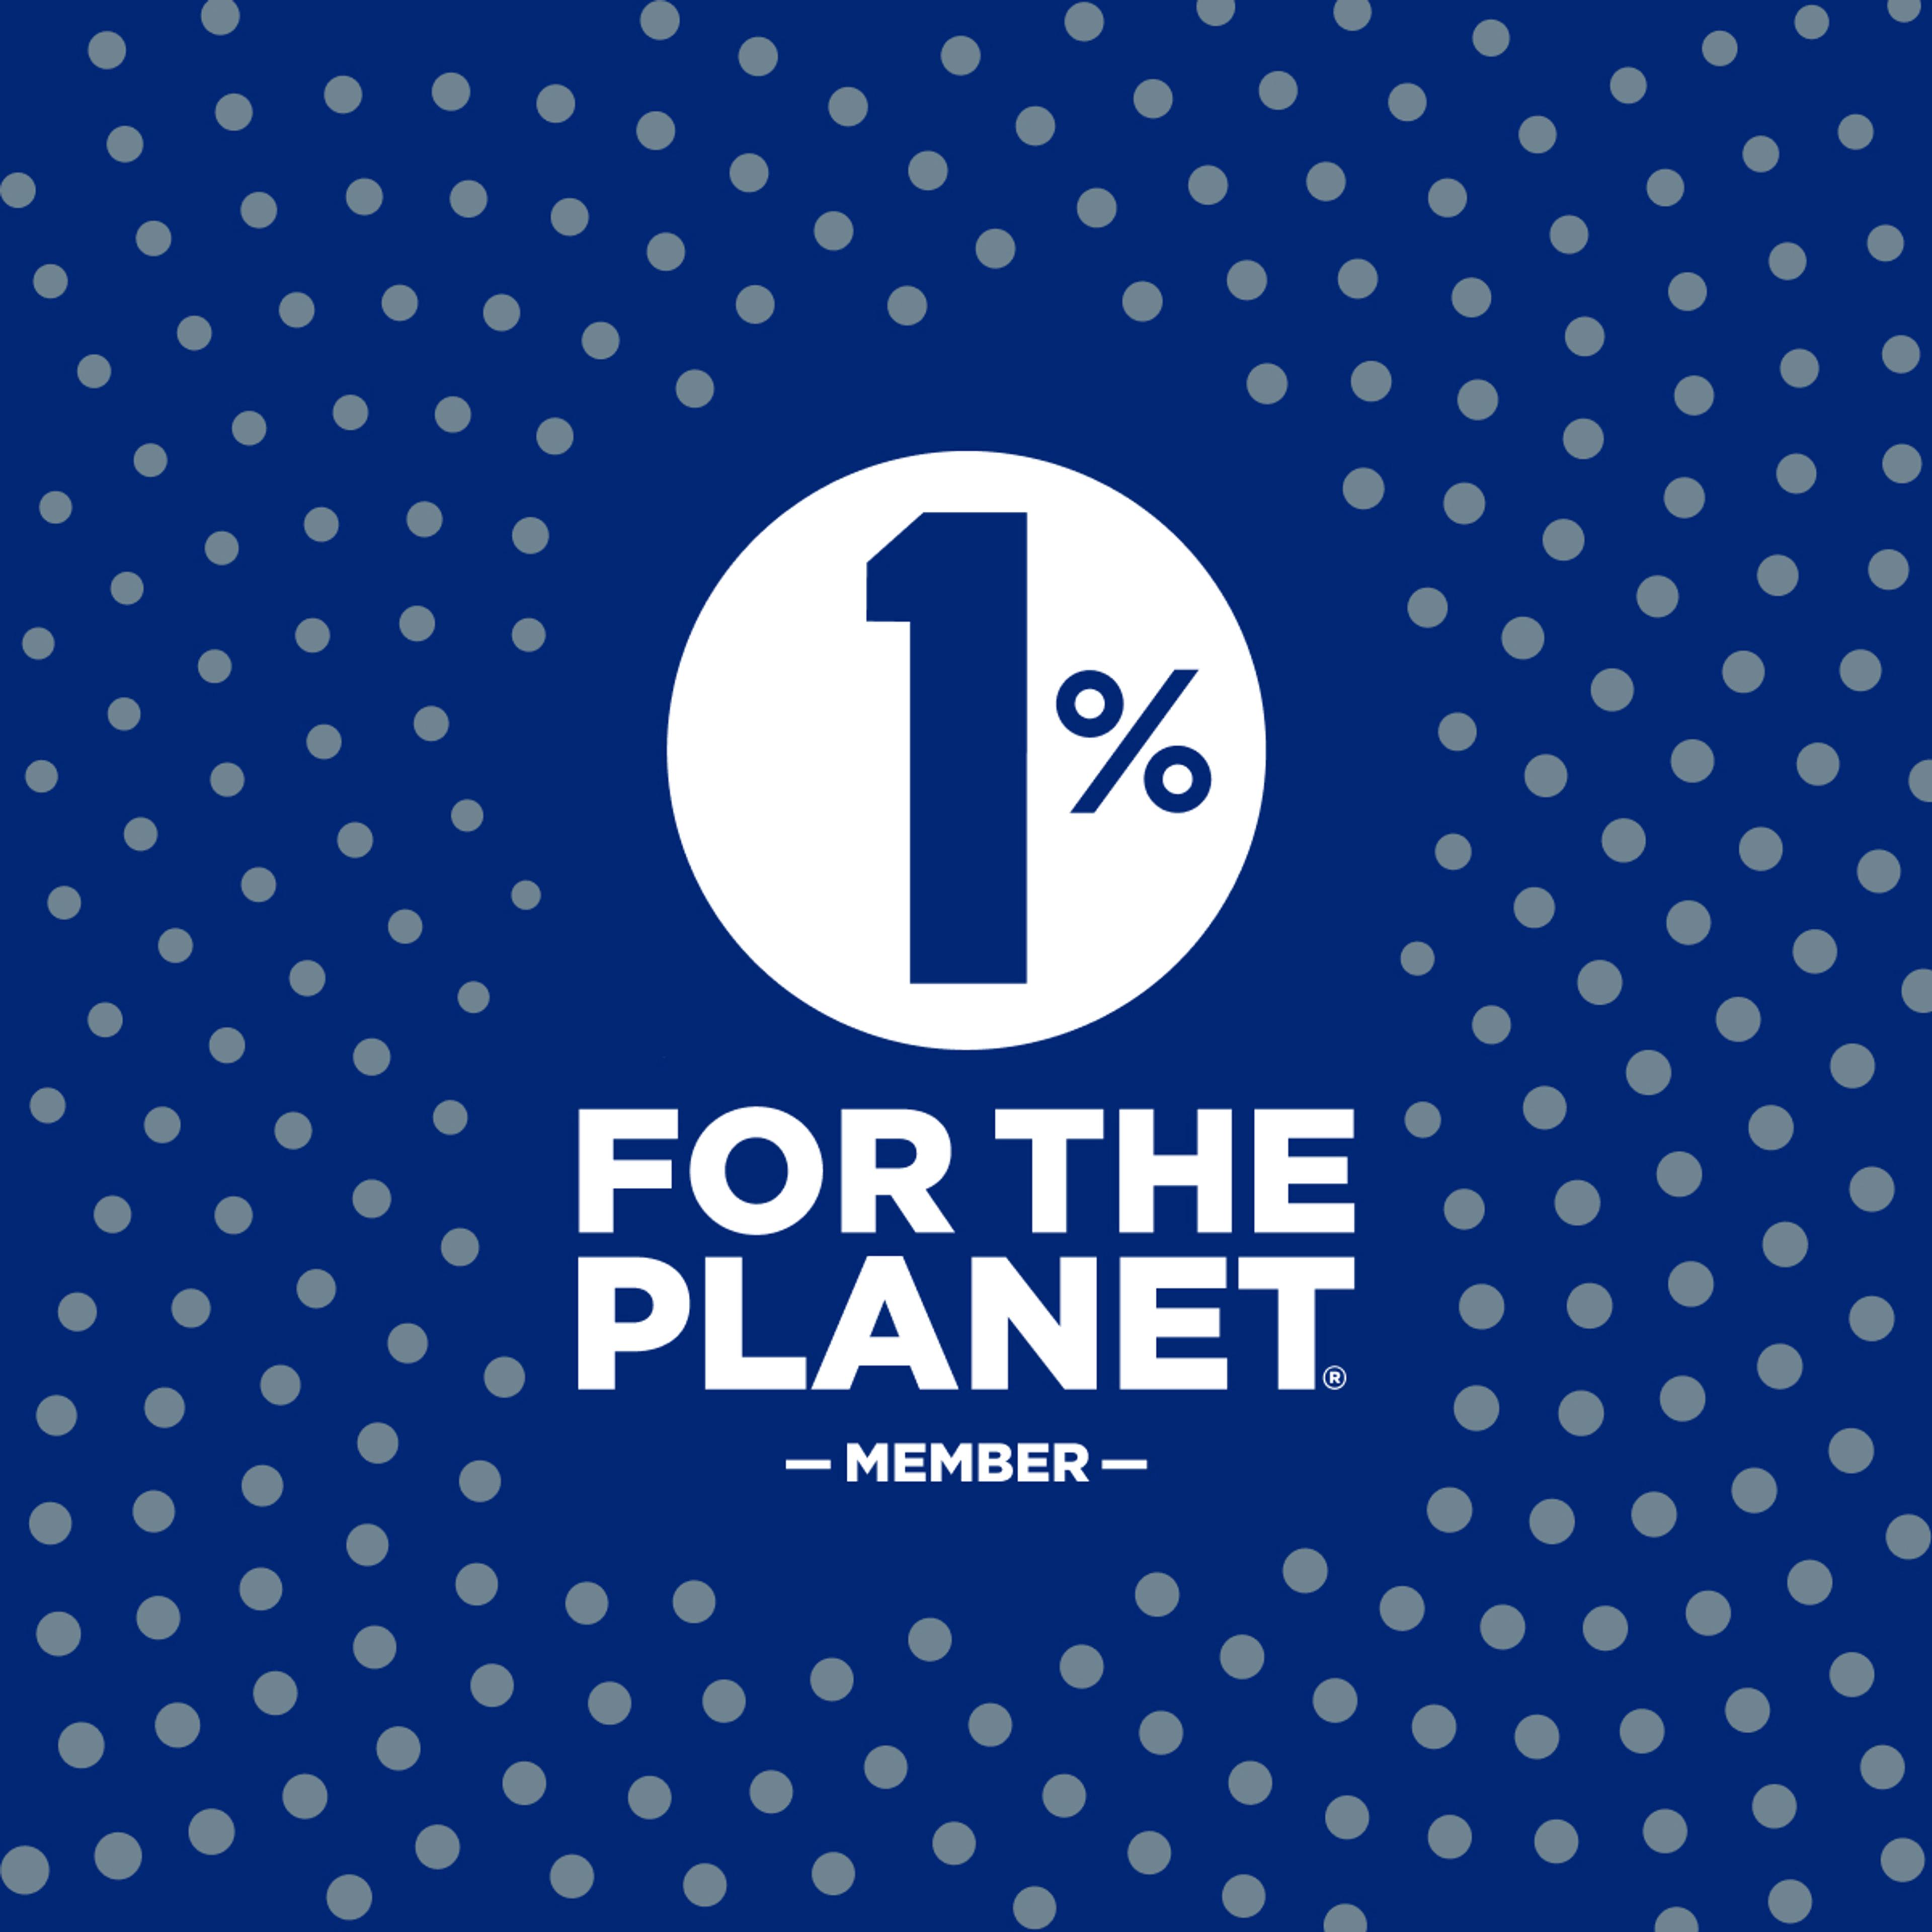 Our commitment to 1% for the Planet